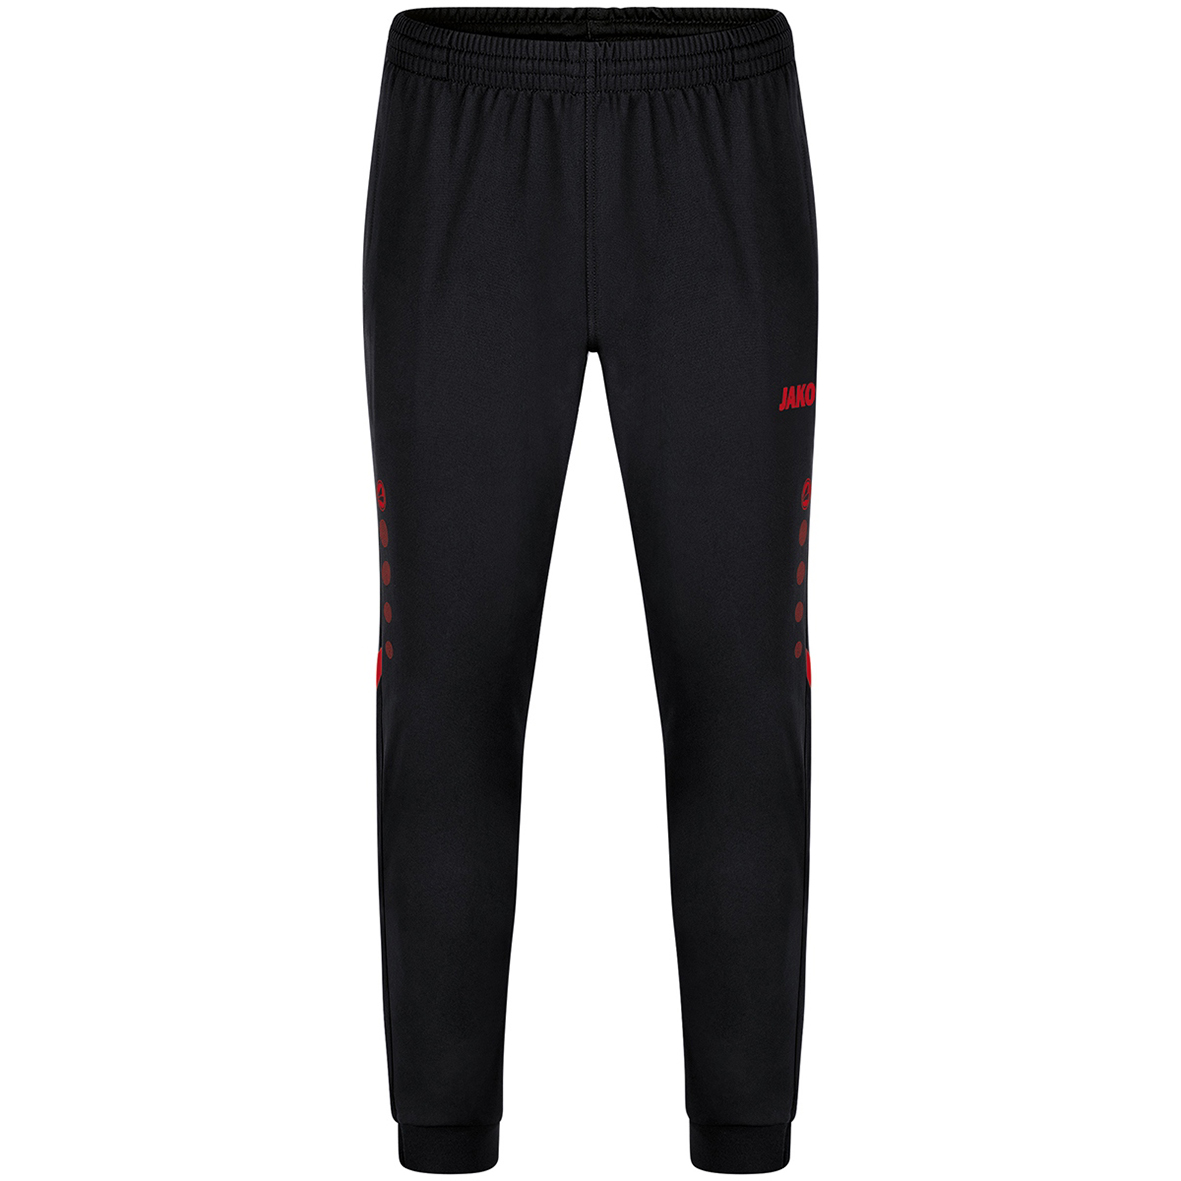 POLYESTER TROUSERS JAKO CHALLENGE, BLACK-RED KIDS.